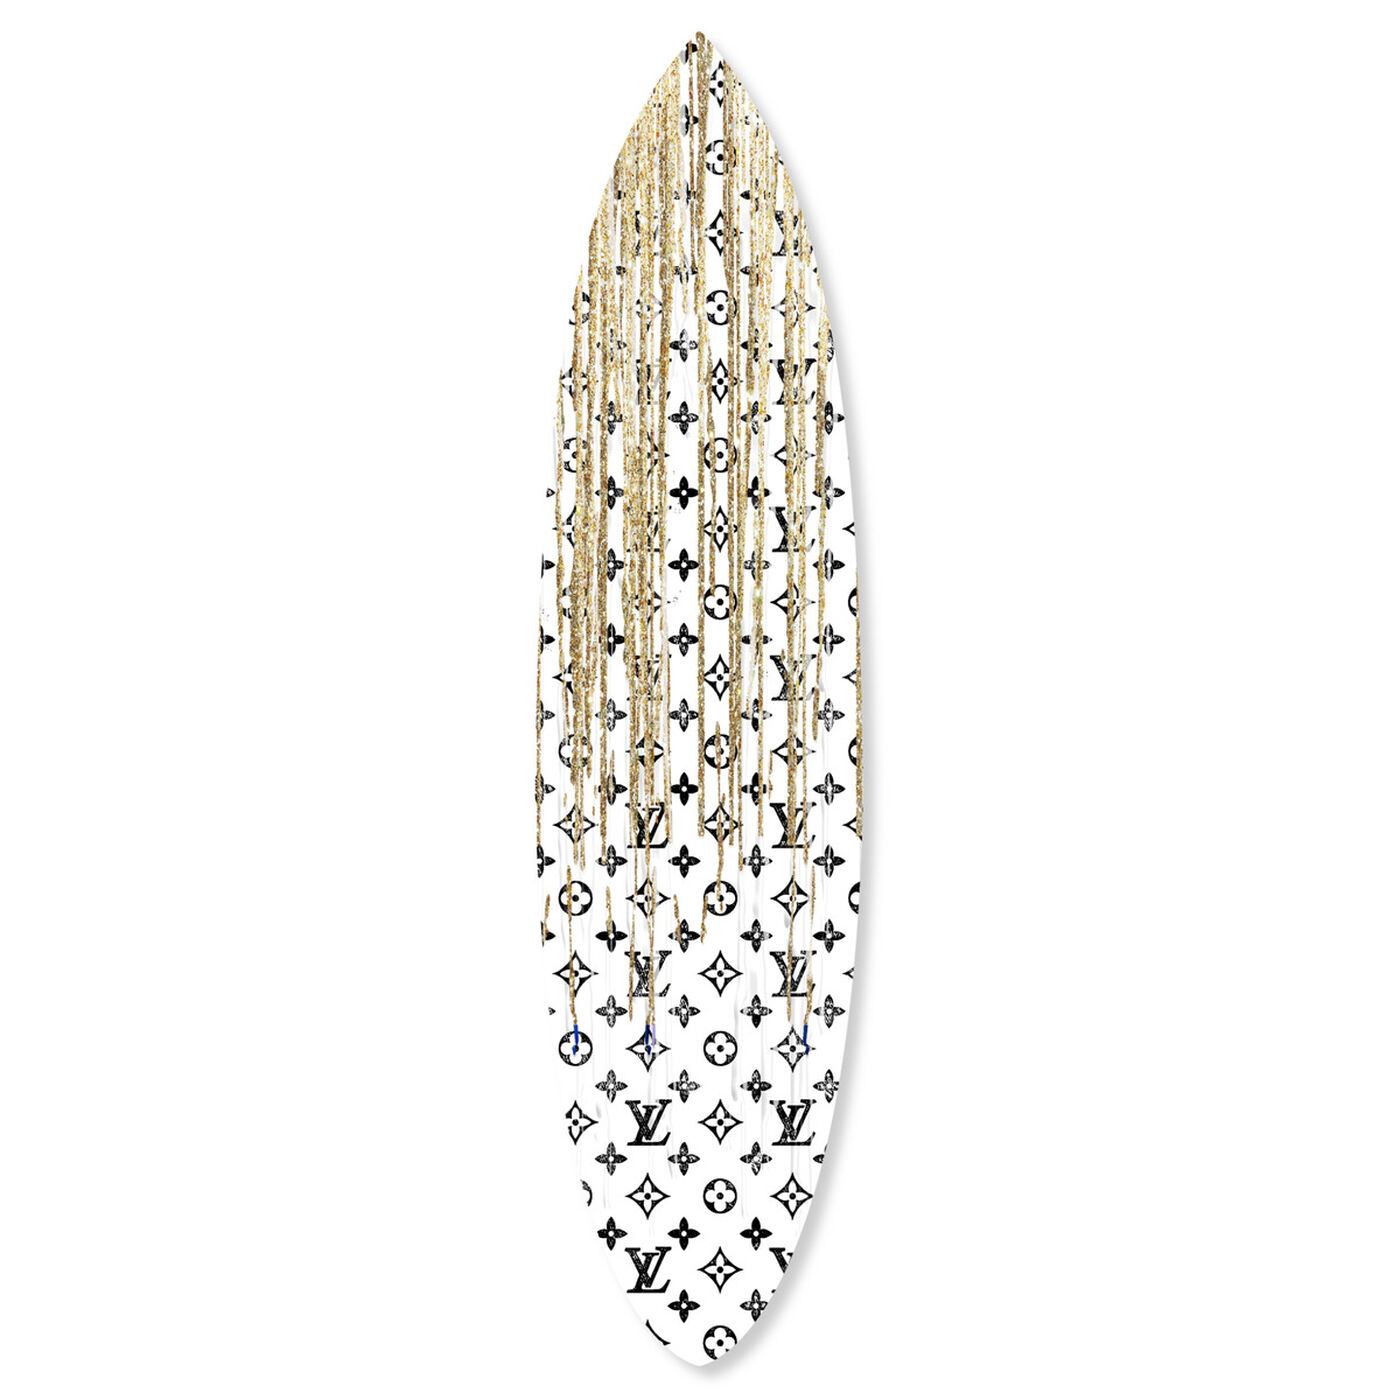 Pop Art Drip Gold Surfboard  Fashion and Glam Wall Art by The Oliver Gal